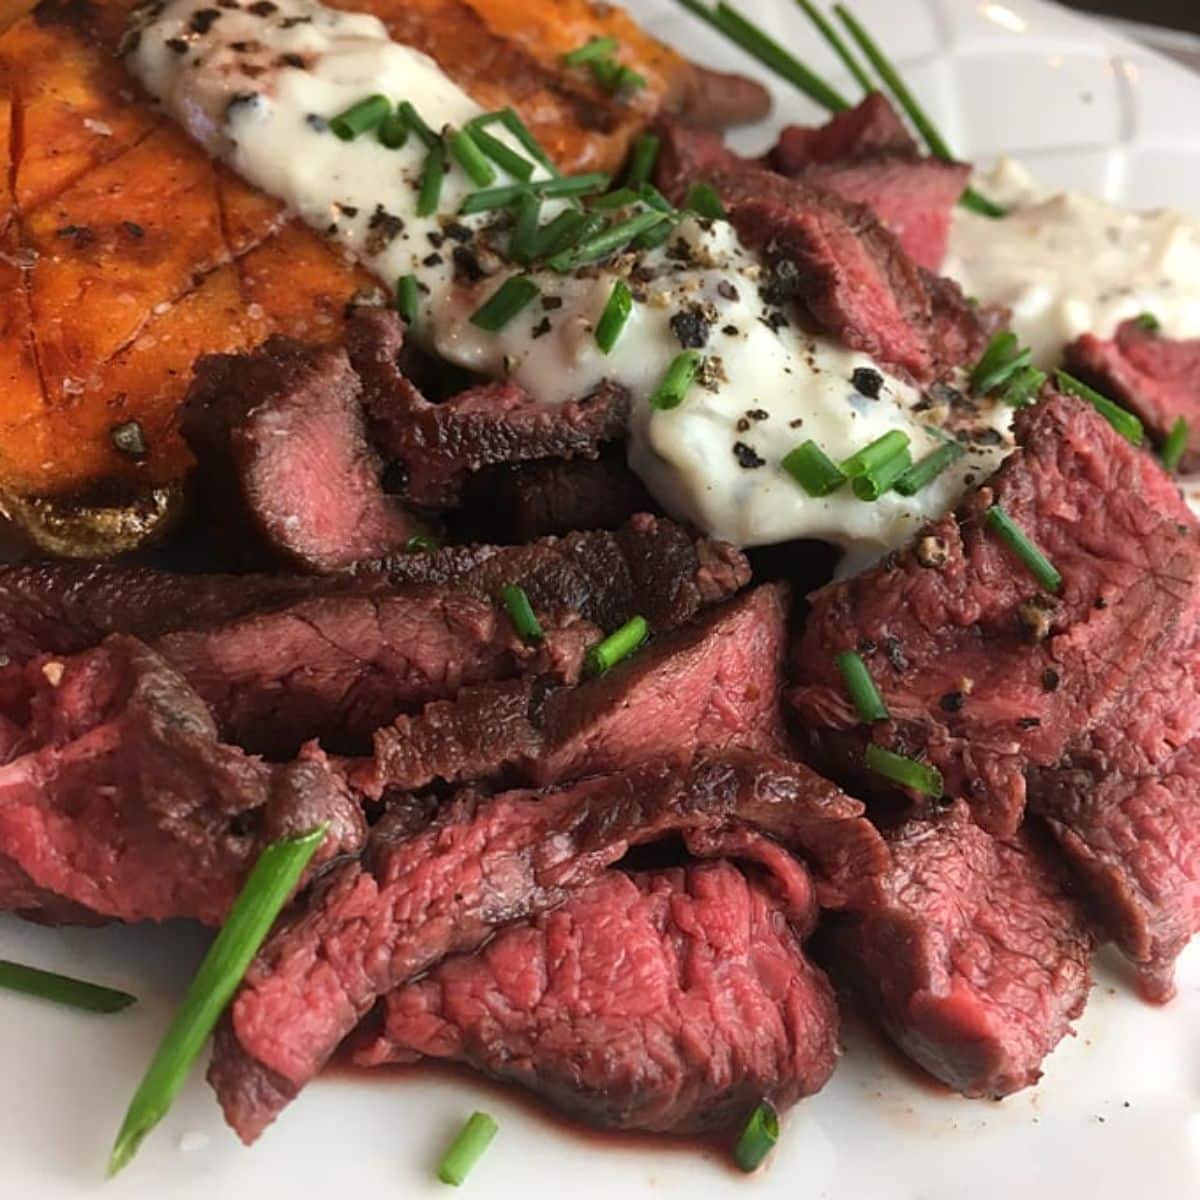 Delicious peppered elk steak with gorgonzola cream sauce on a white tray.